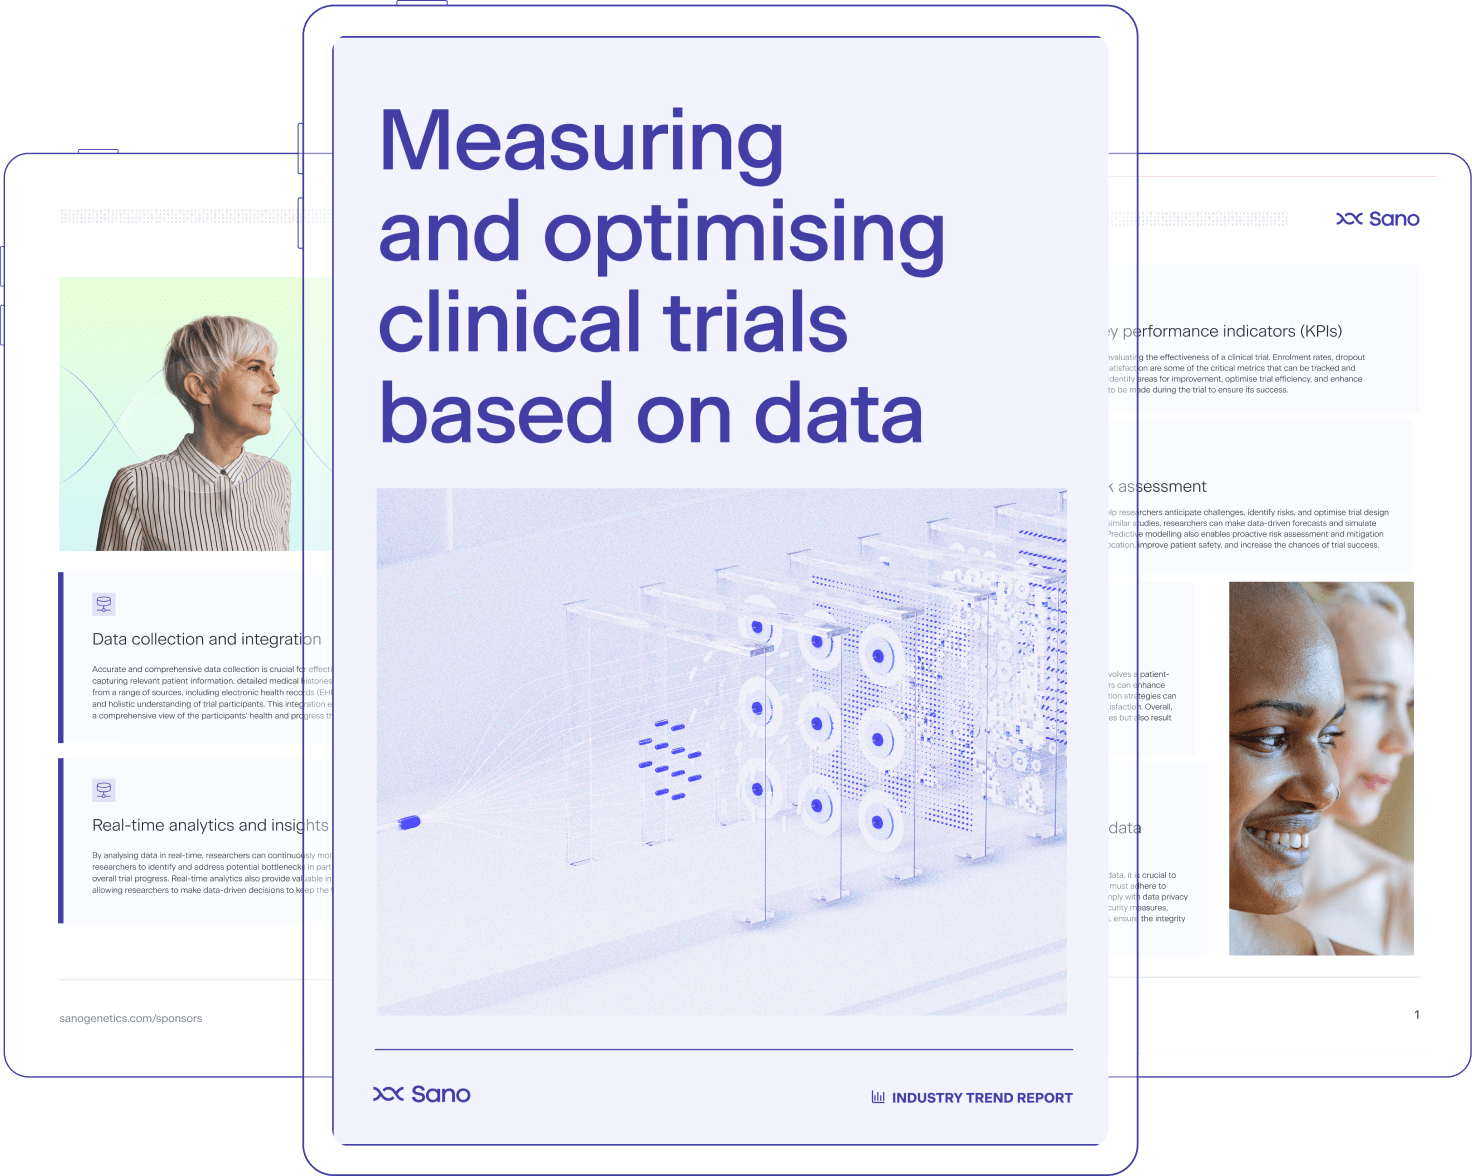 Measuring and optimising clinical trials based on data